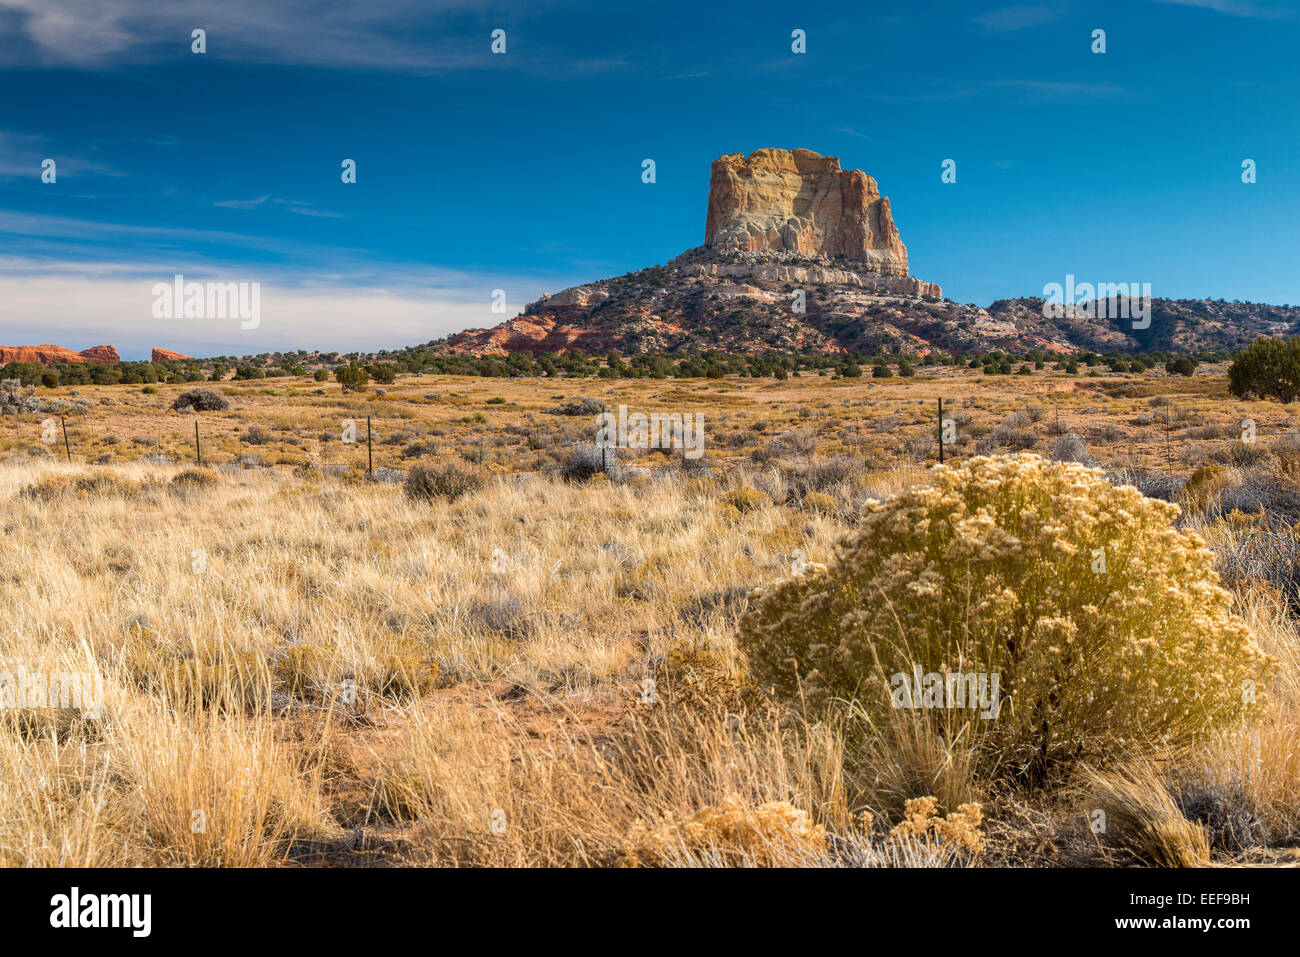 Isolated butte steep hill in a scenic desert landscape, Navajo Nation Indian Reservation, Arizona, USA Stock Photo